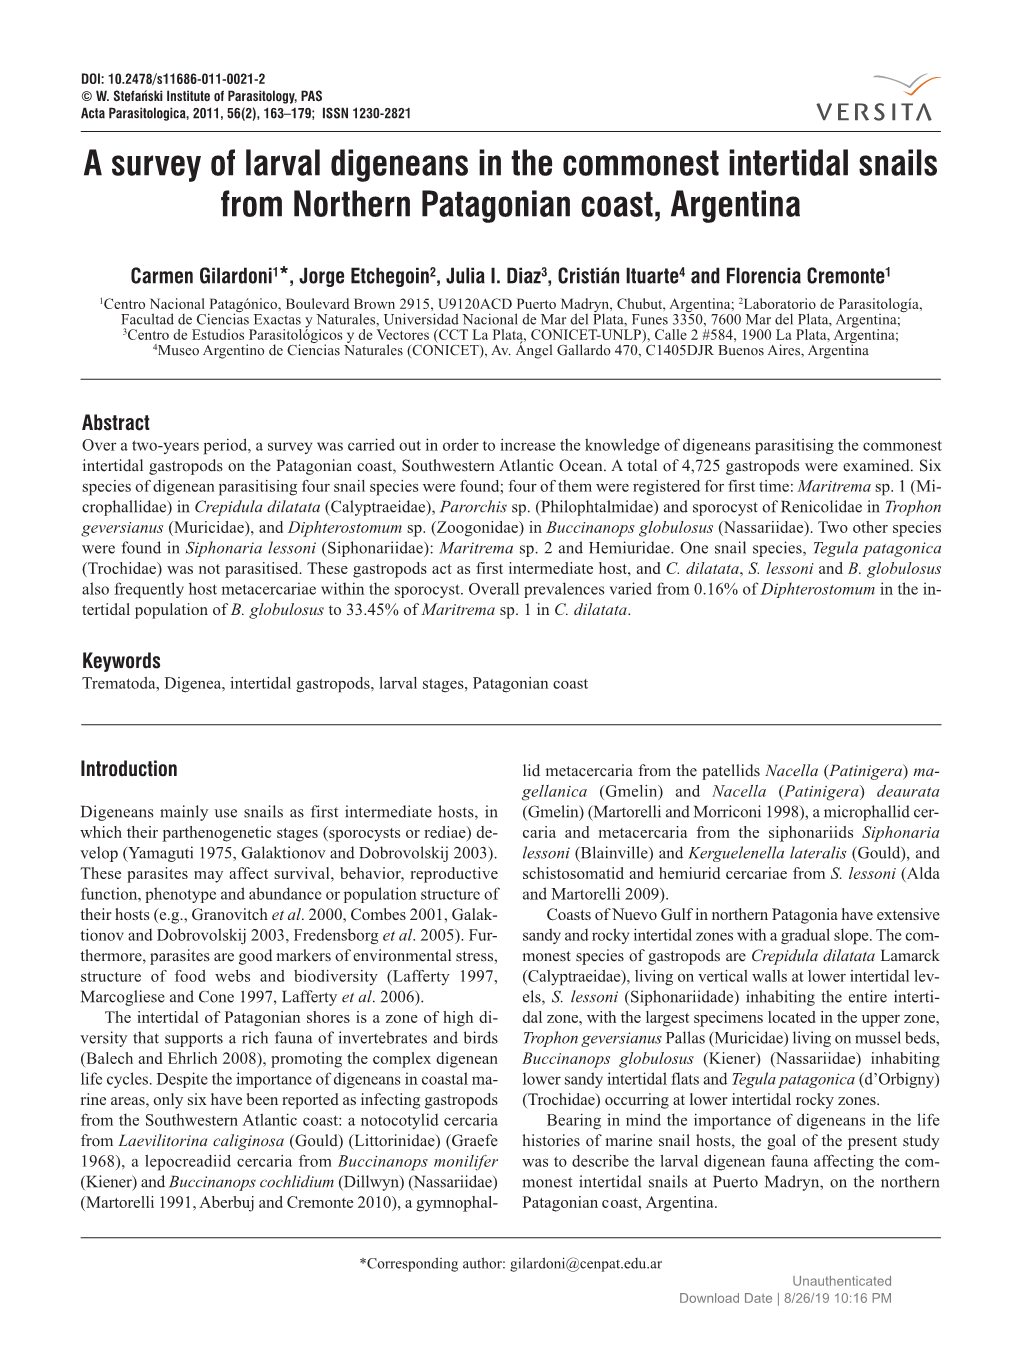 A Survey of Larval Digeneans in the Commonest Intertidal Snails from Northern Patagonian Coast, Argentina